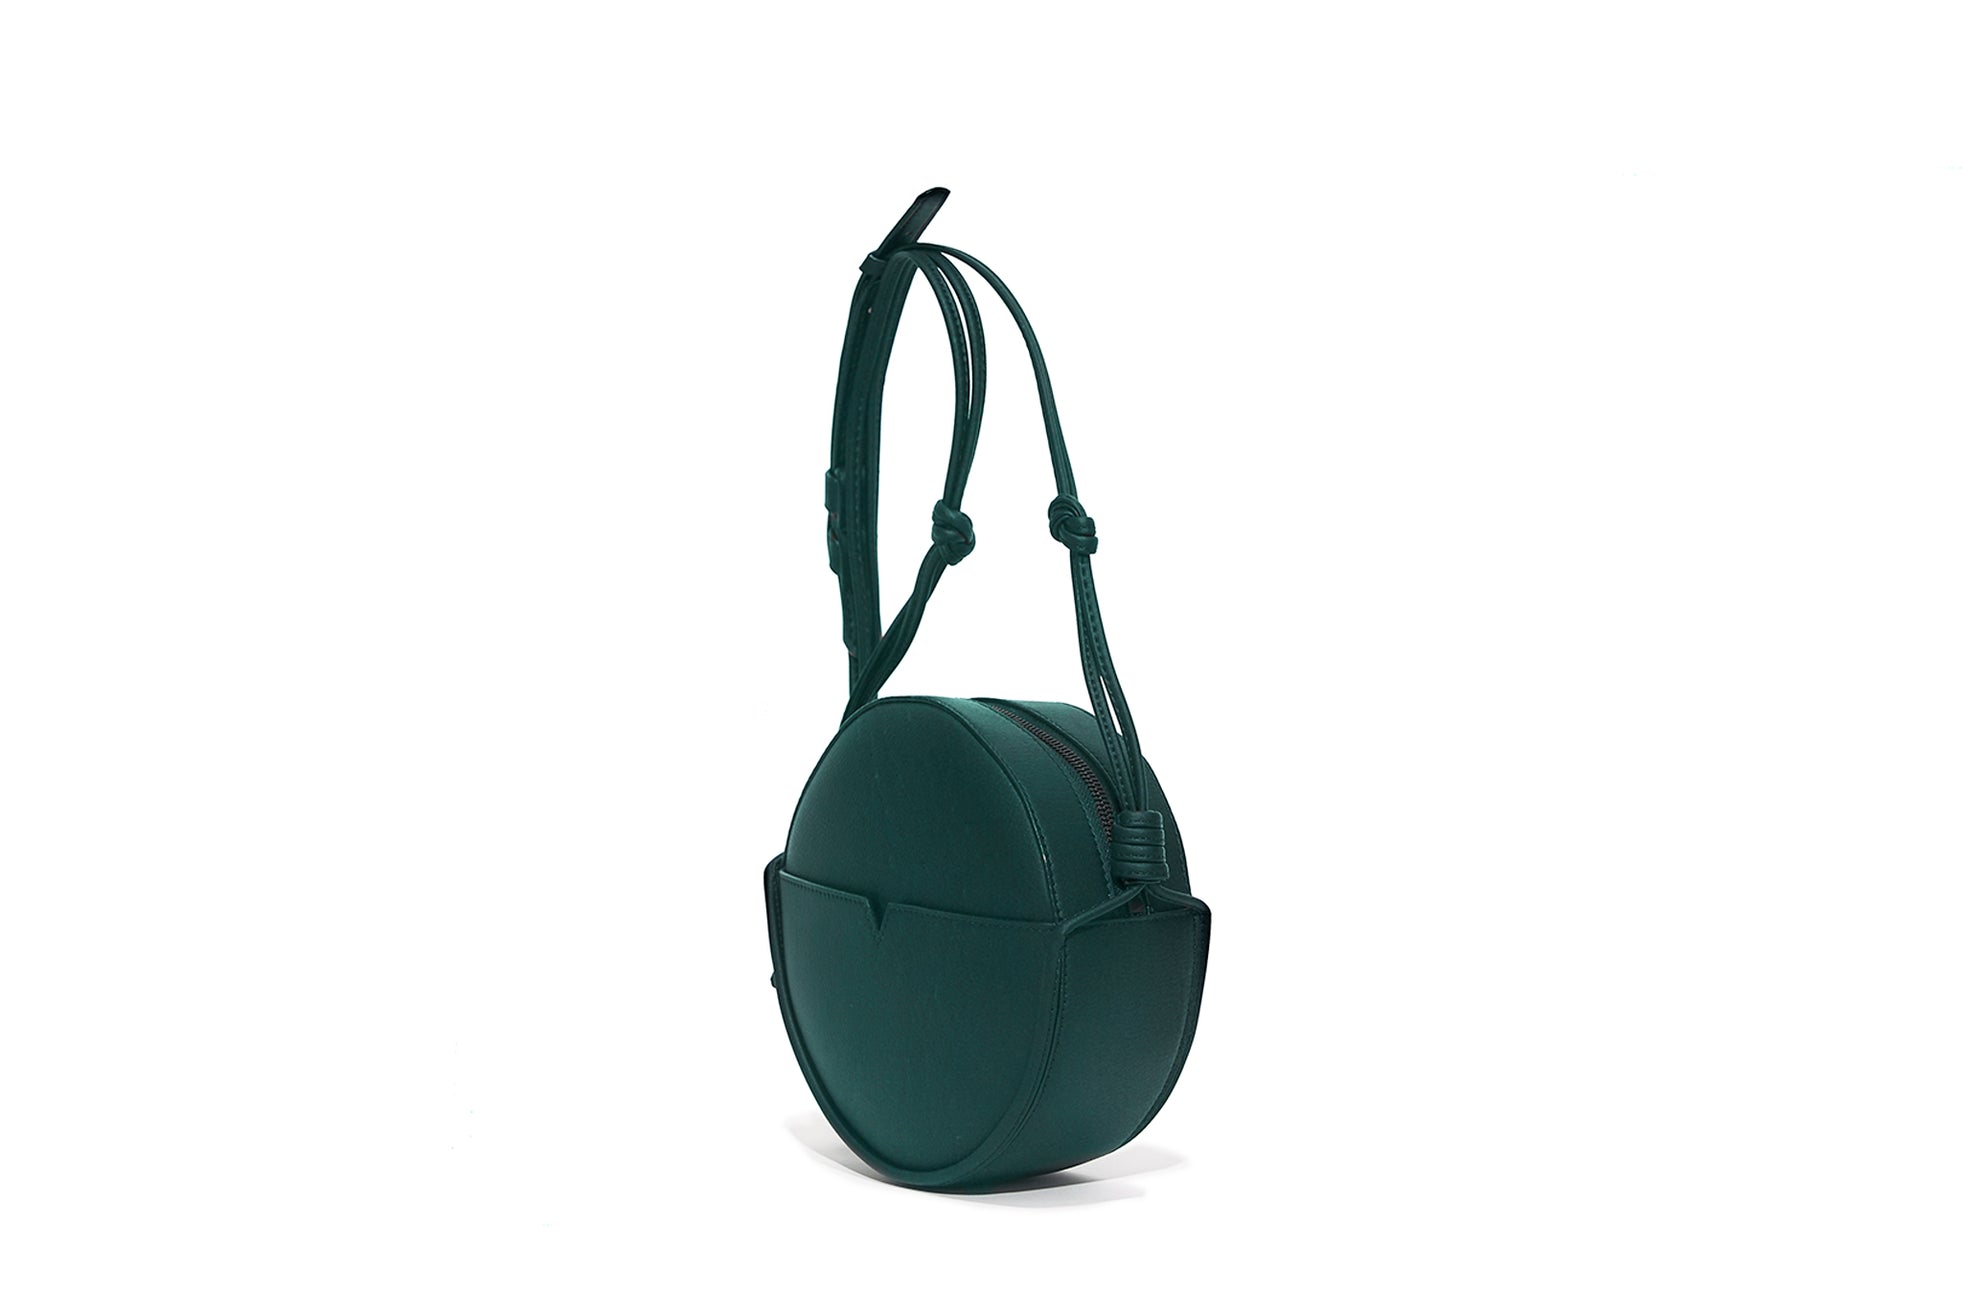 The Circle Crossbody in Banbū Leather in Forest image 3